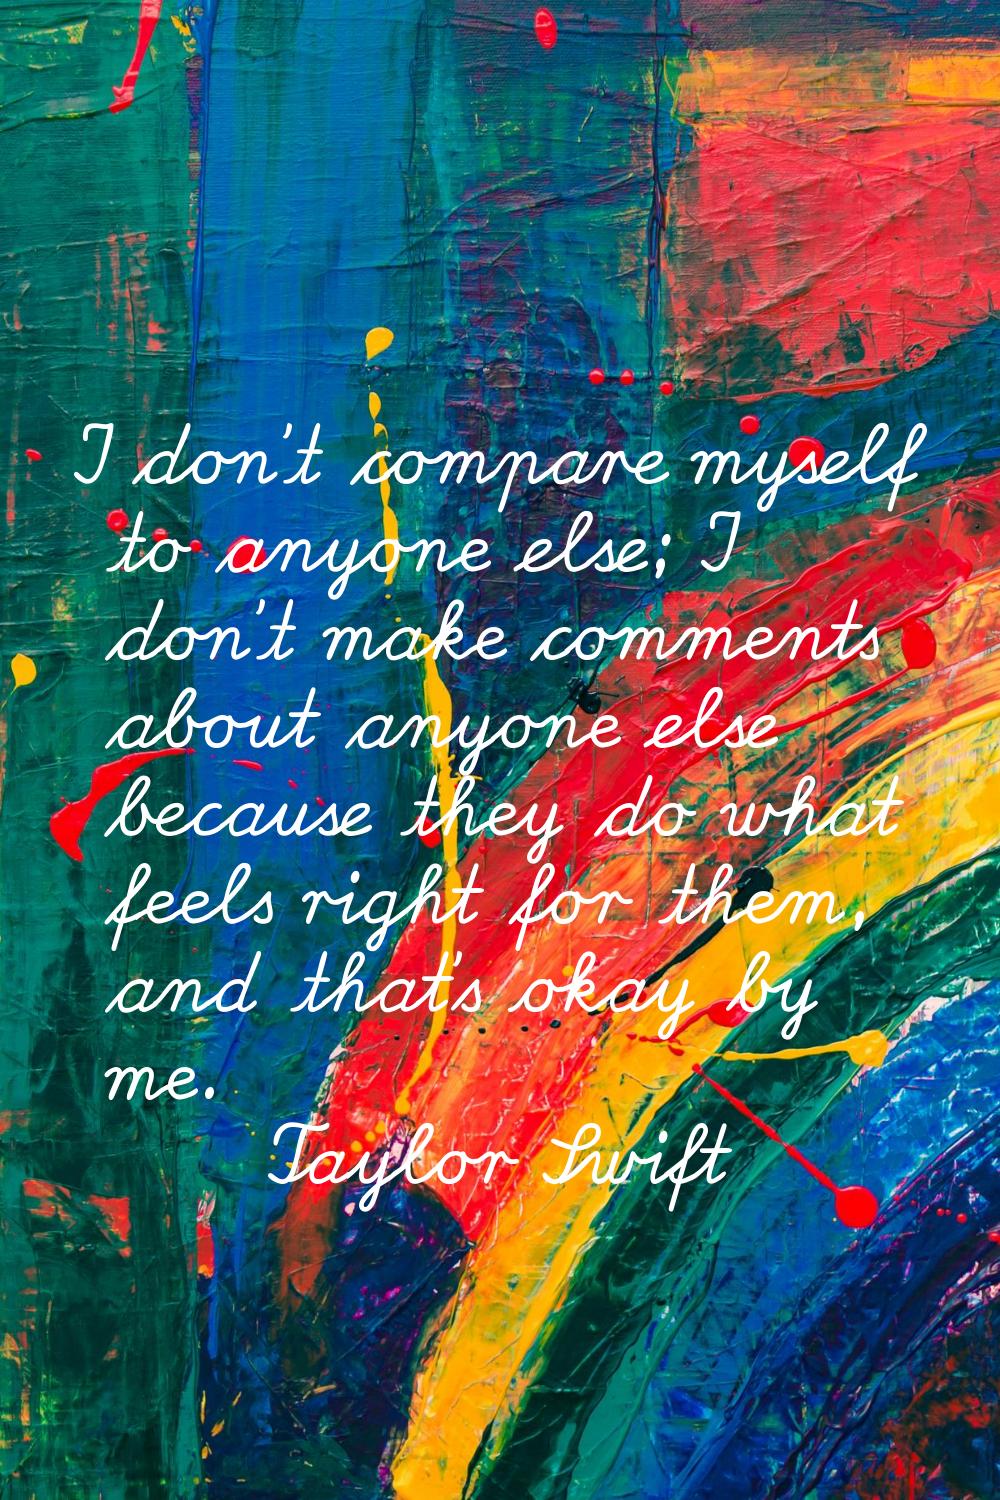 I don't compare myself to anyone else; I don't make comments about anyone else because they do what